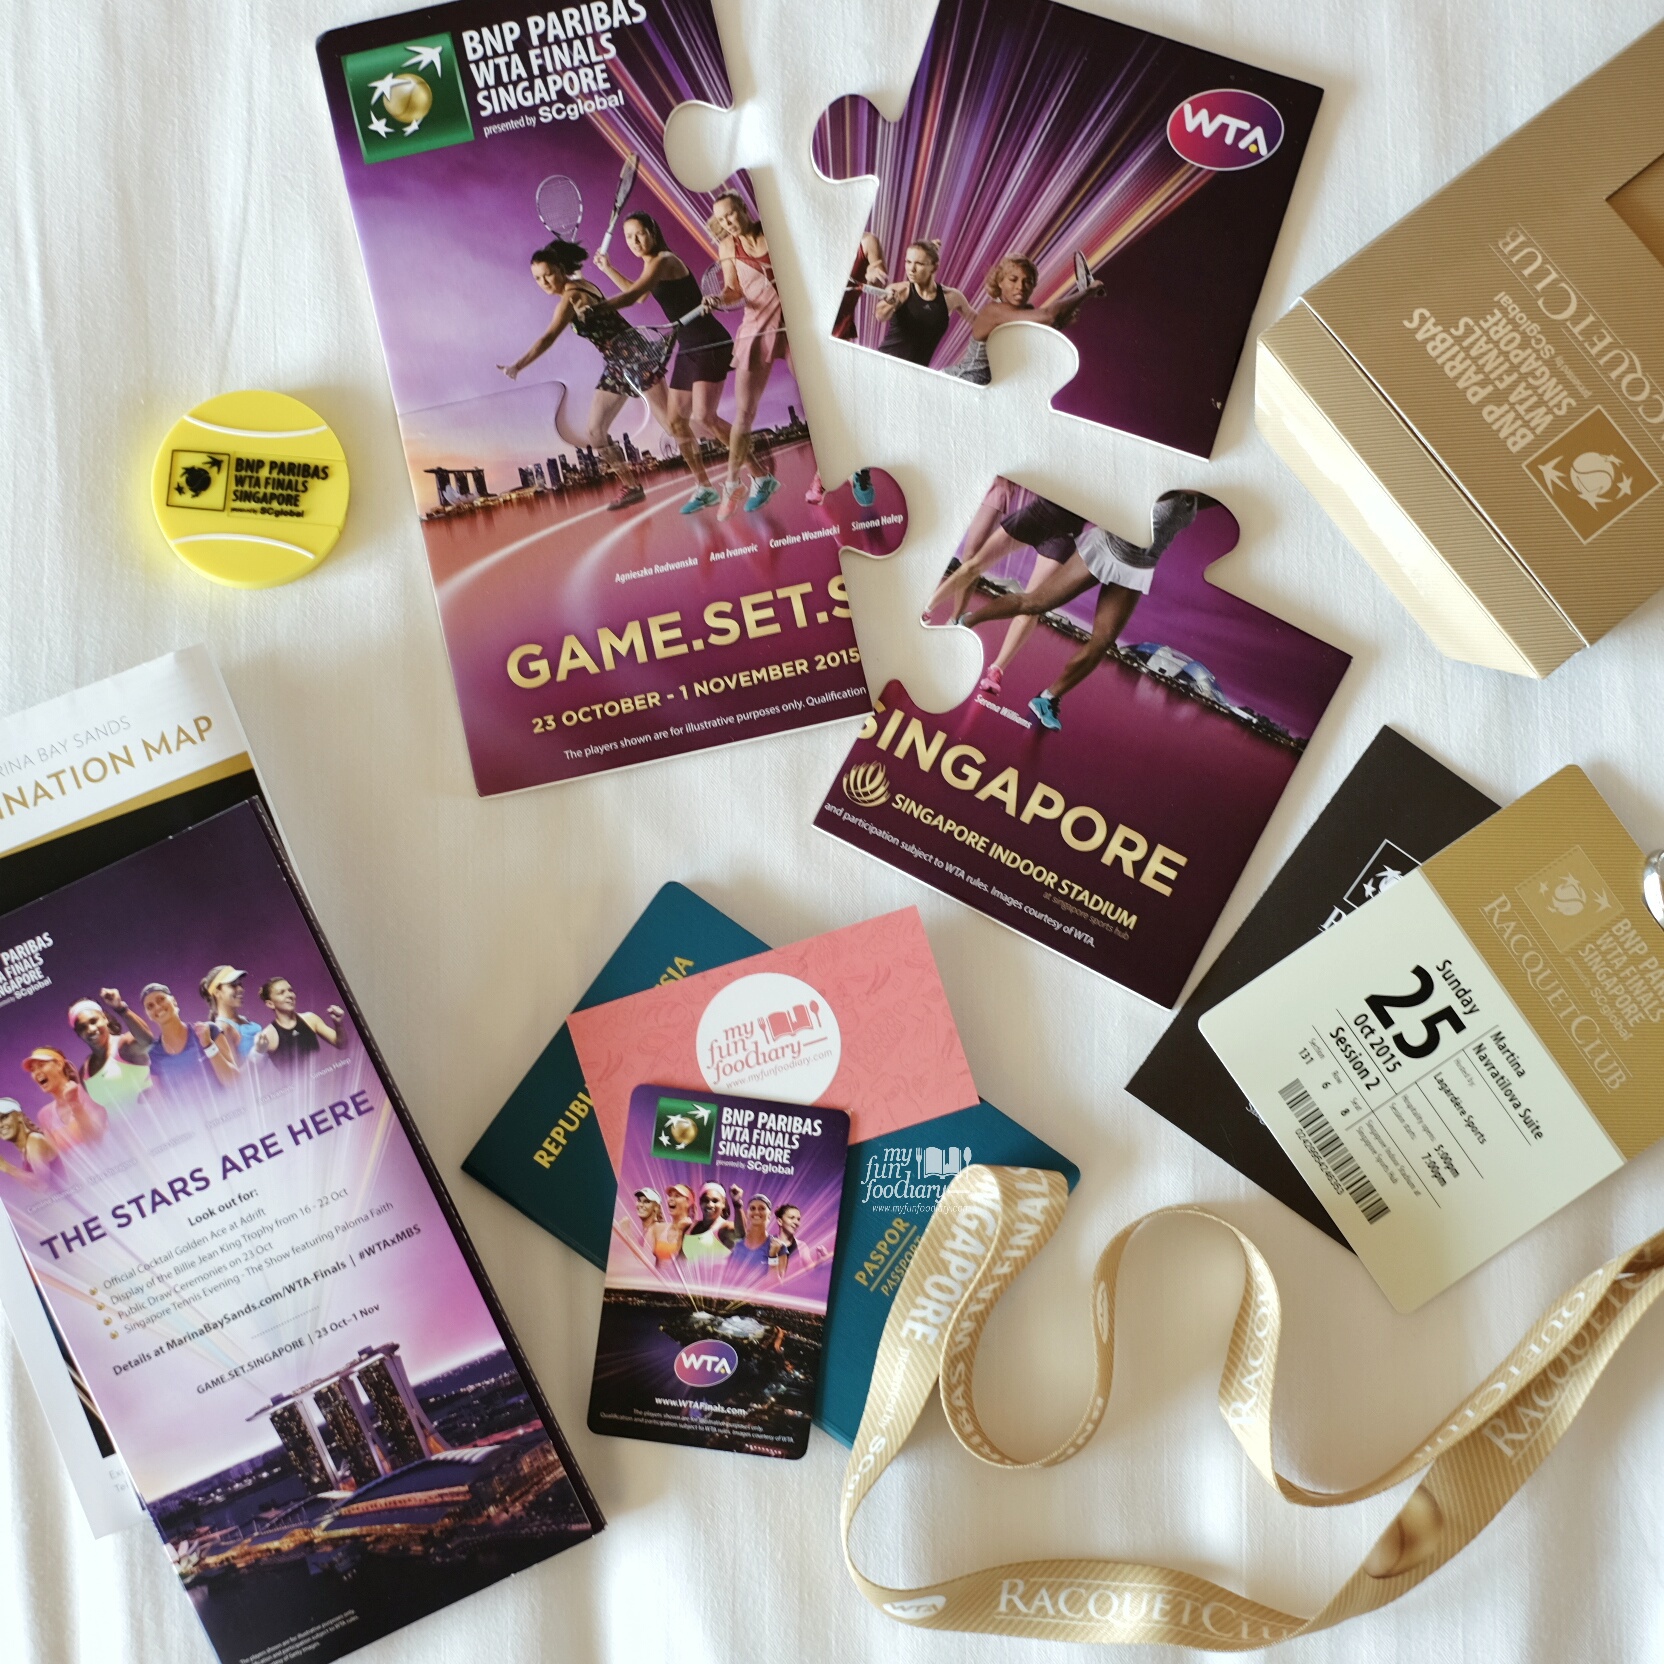 Special Tickets to Watch the WTA Finals 2015 on Sunday in Singapore by Myfunfoodiary